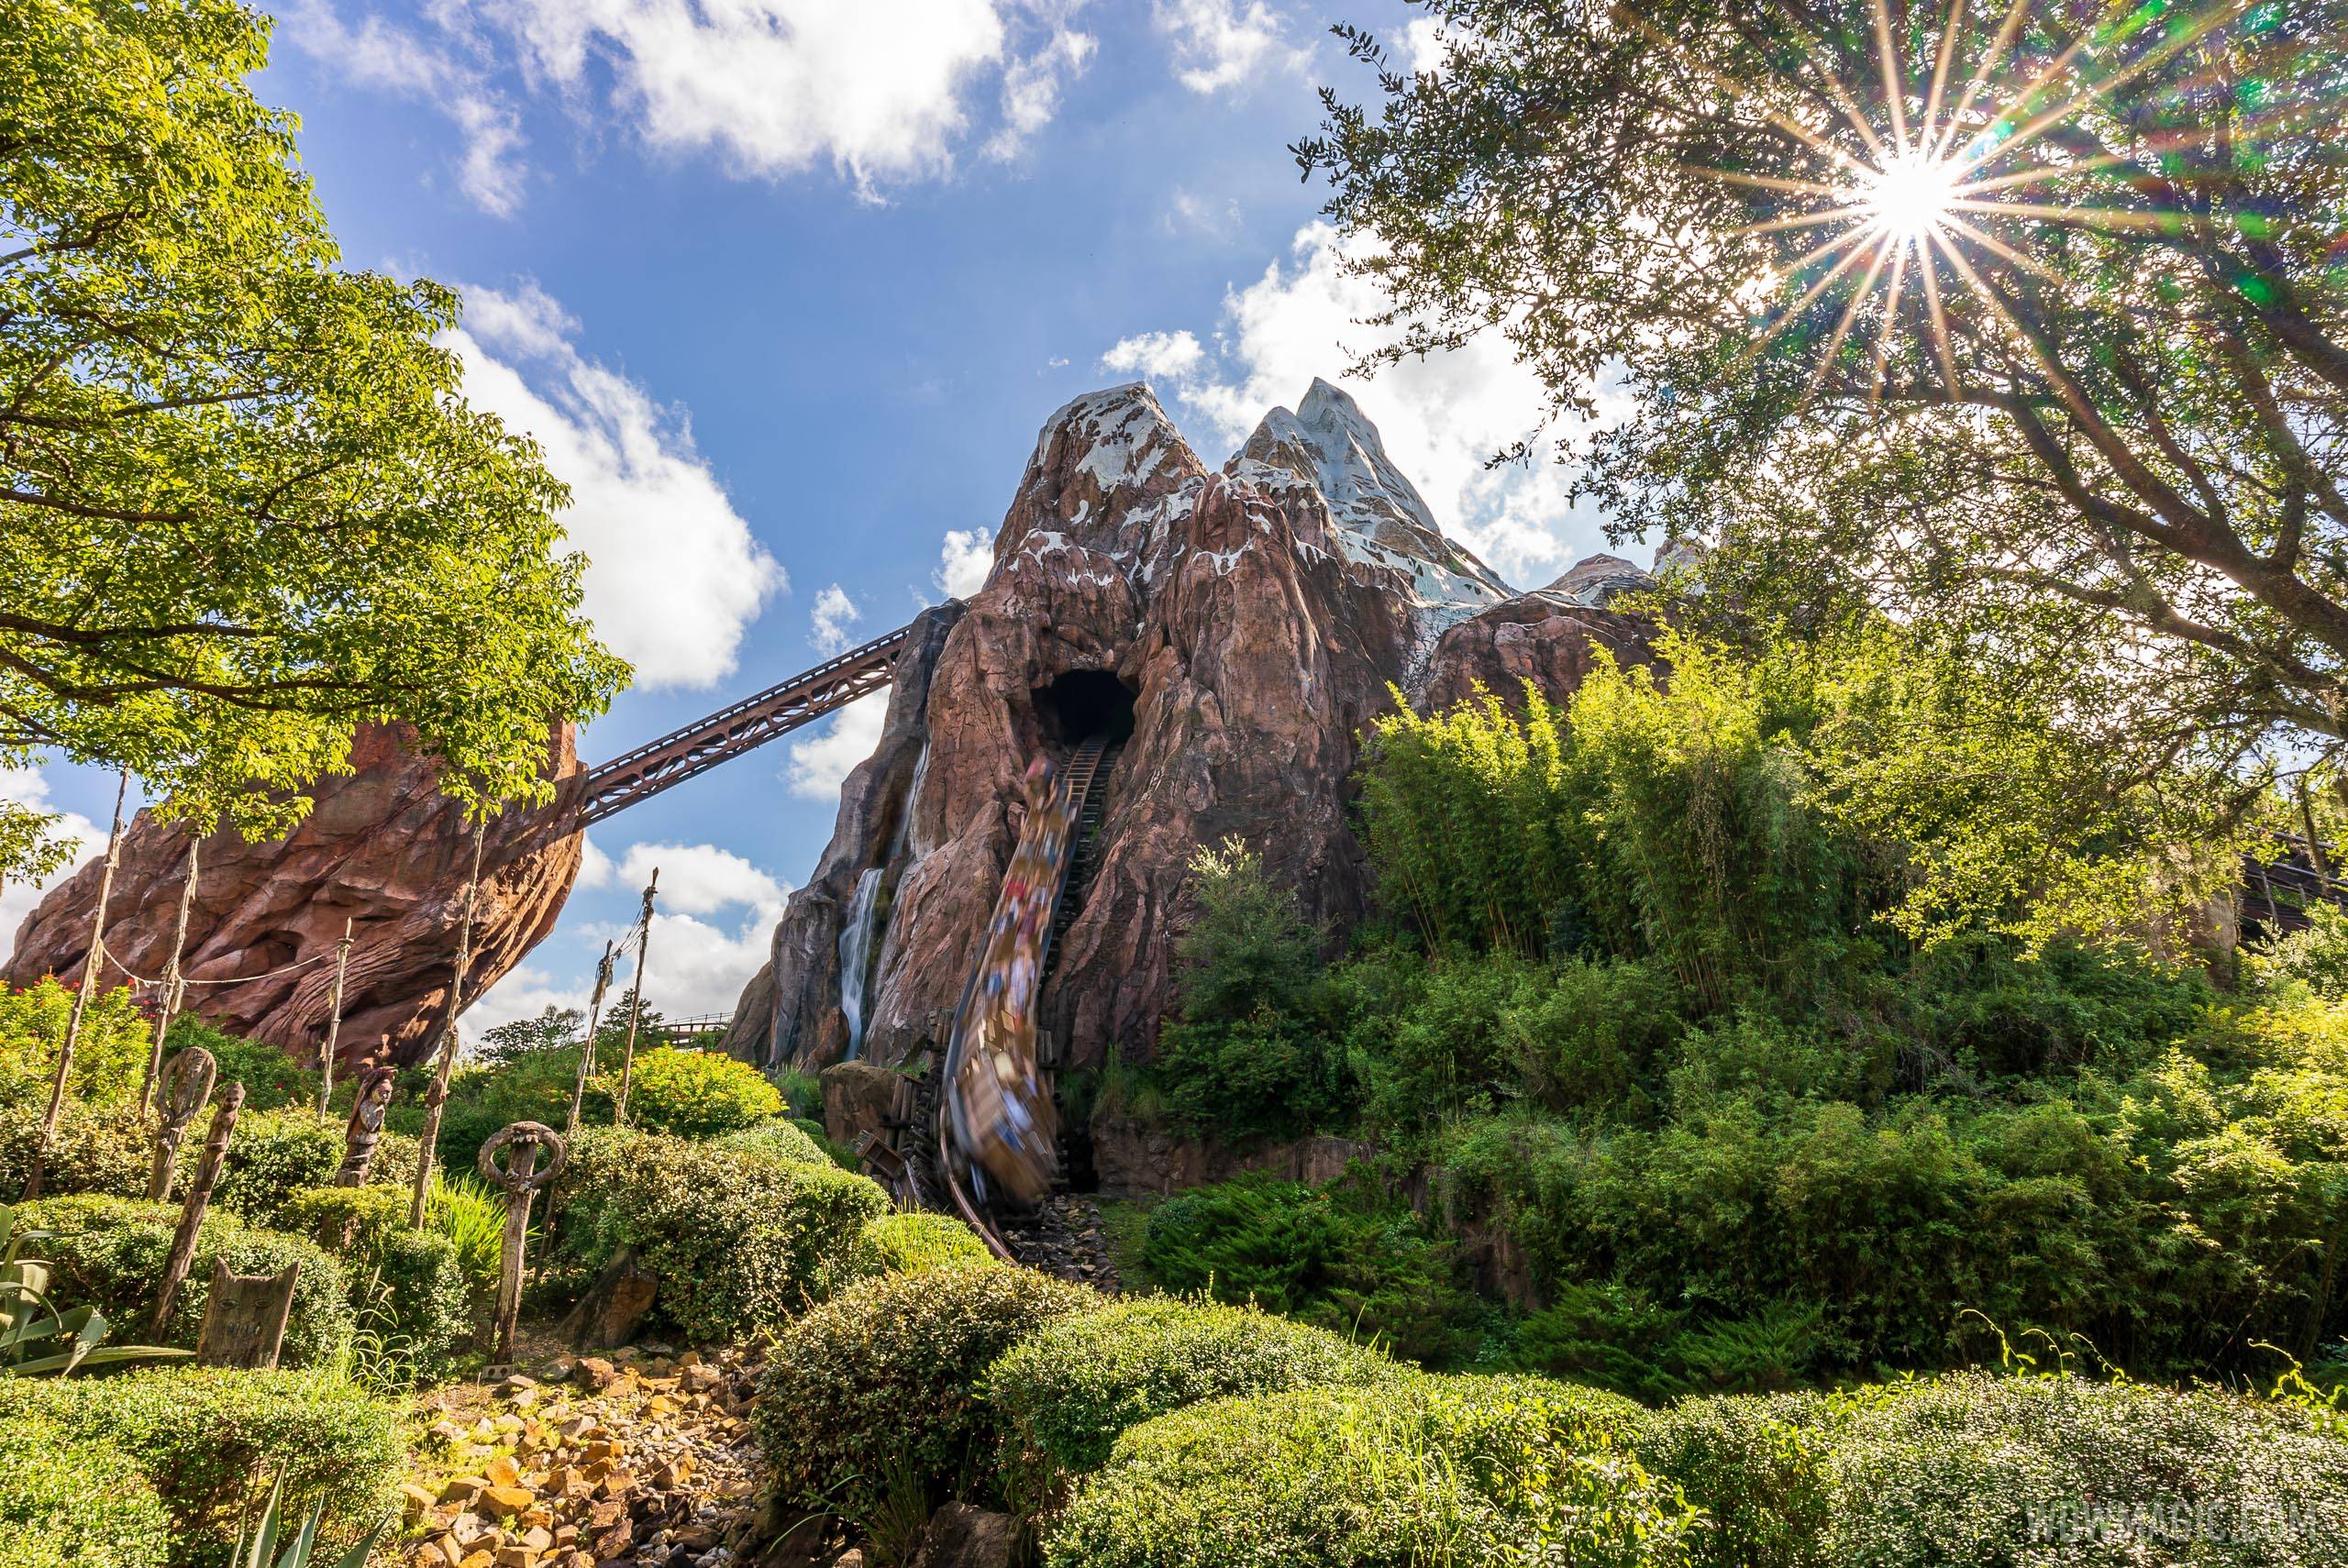 Expedition Everest is now closed for refurbishment